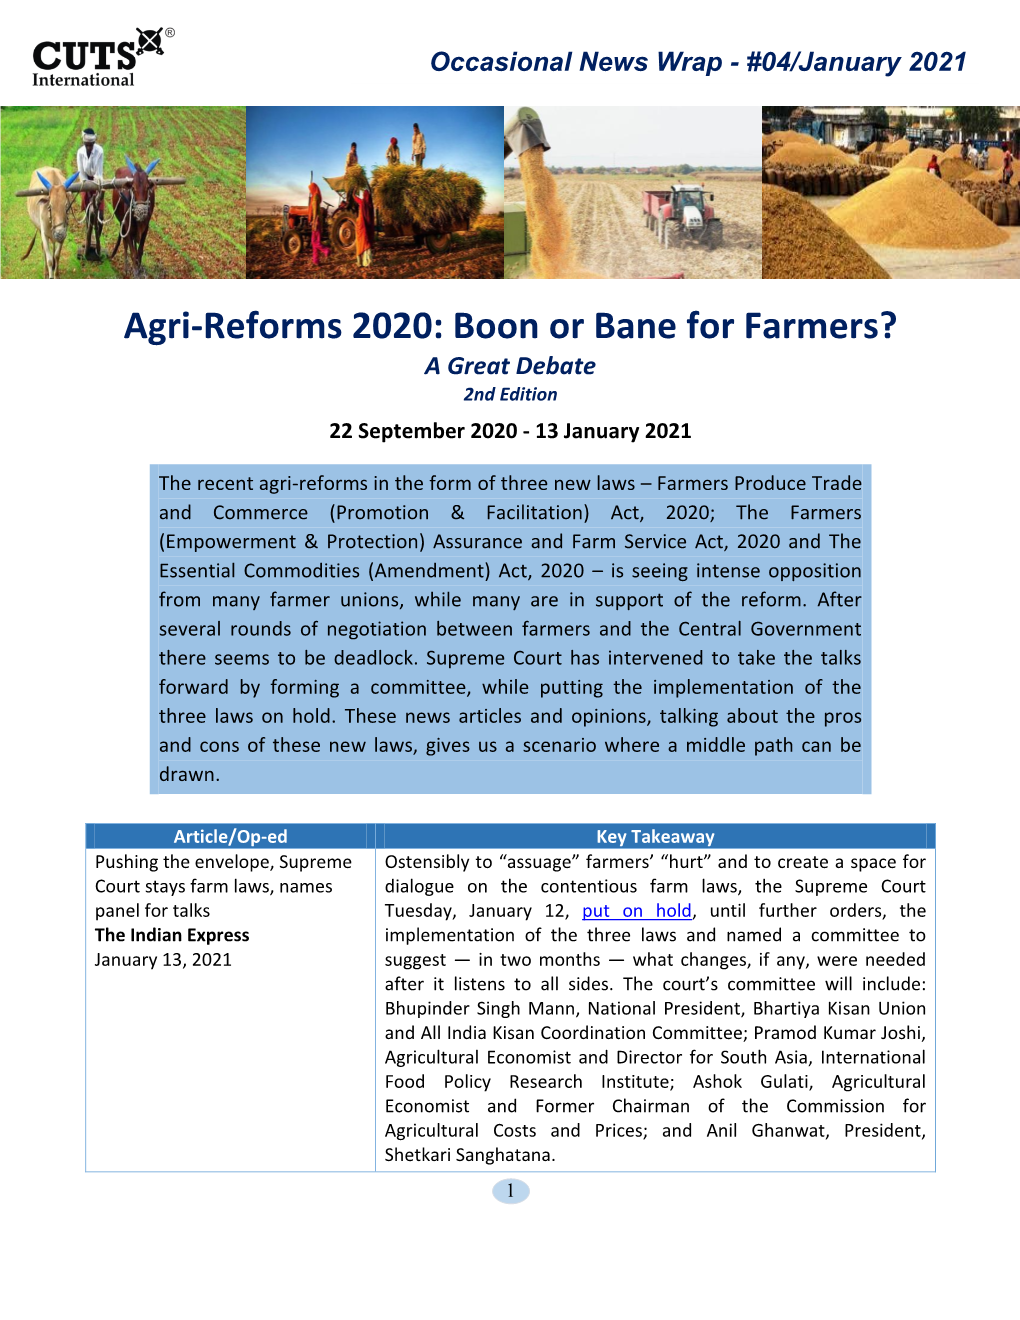 Agri-Reforms 2020: Boon Or Bane for Farmers? a Great Debate 2Nd Edition 22 September 2020 - 13 January 2021